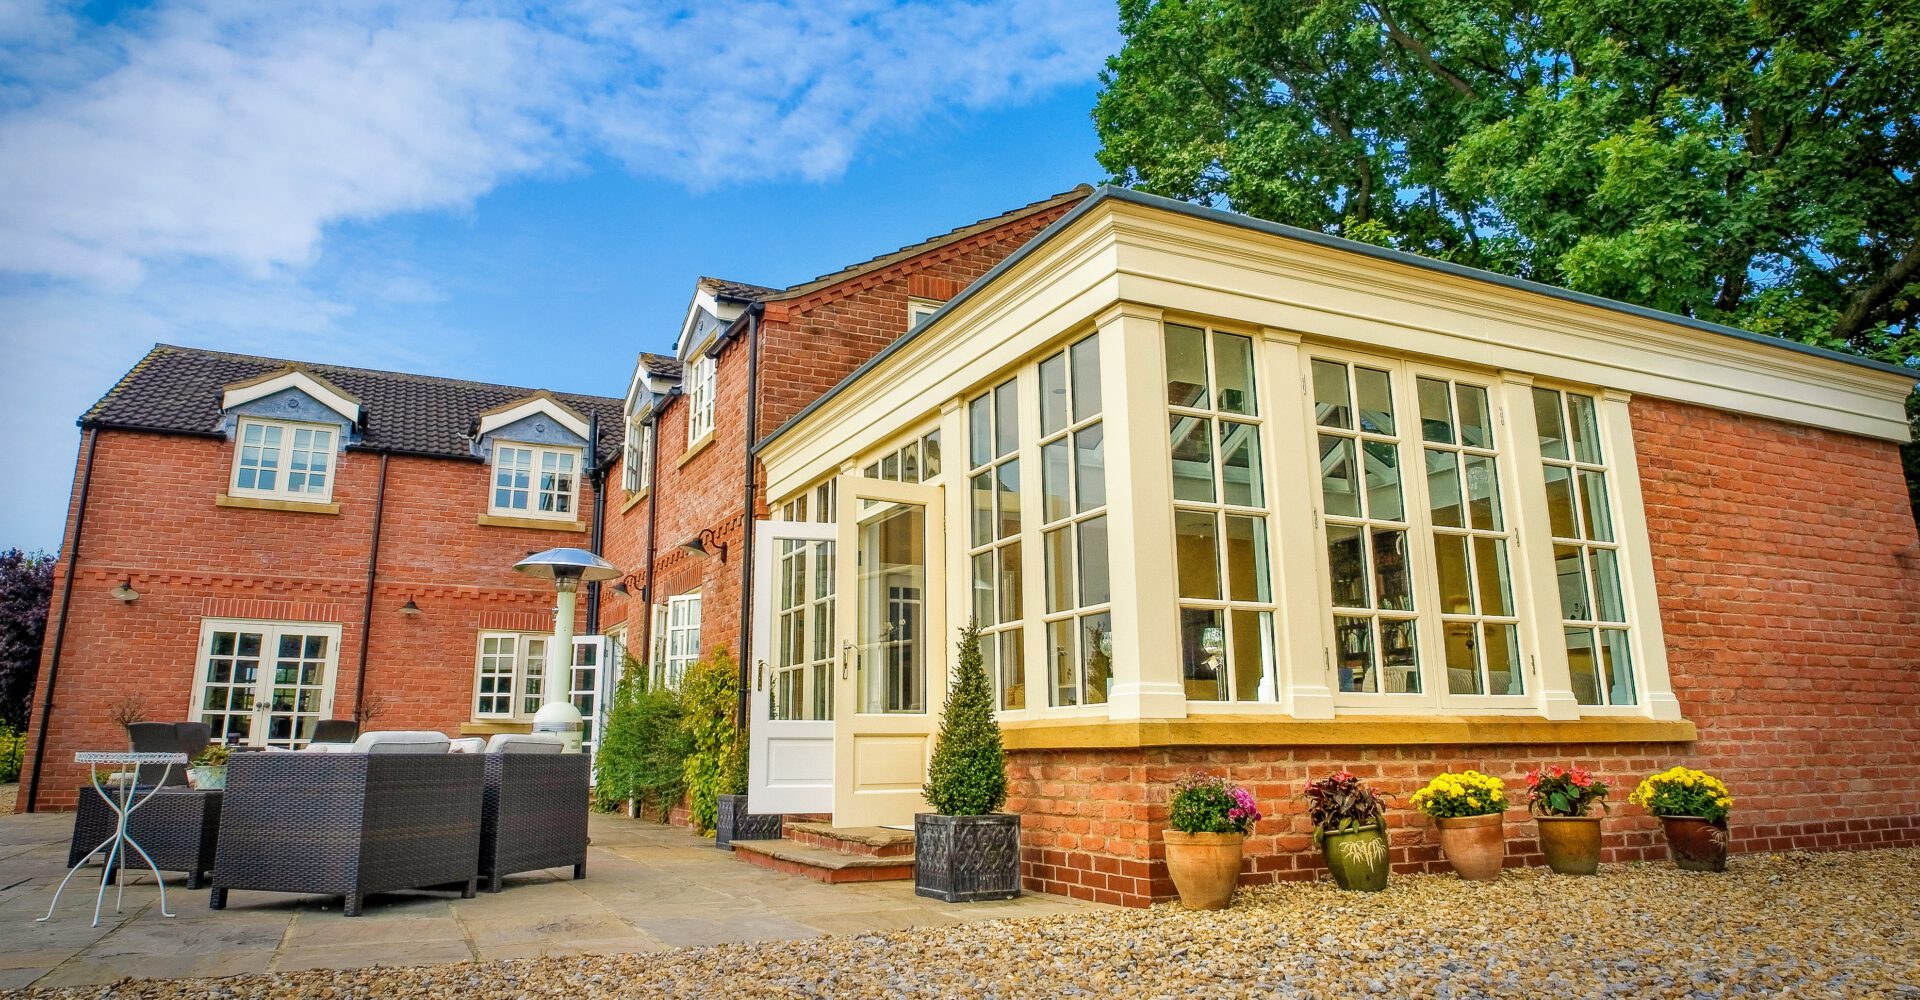 Beautiful traditional timber framed orangery in York